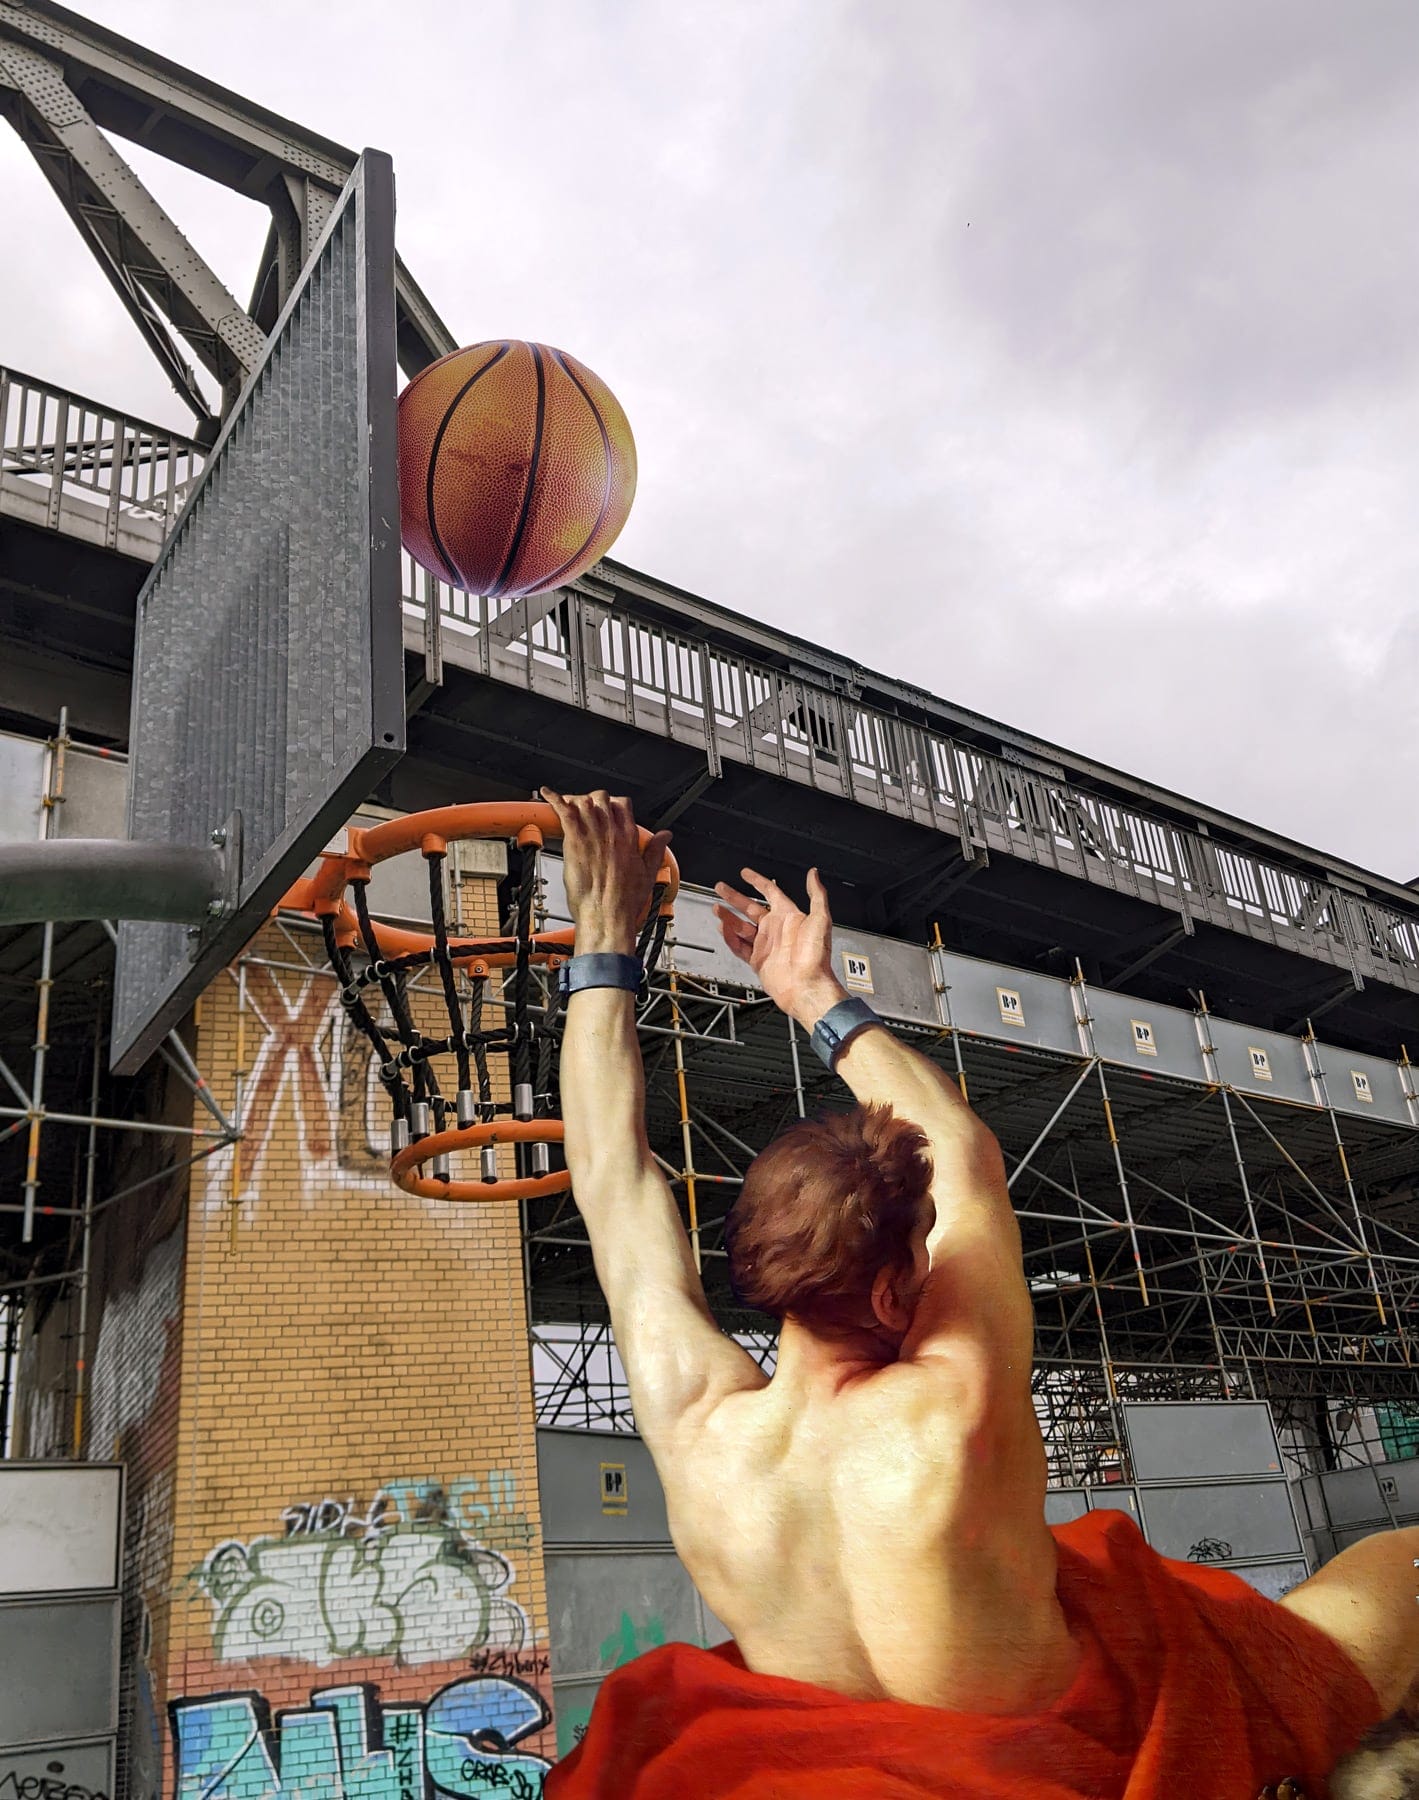 a man with a flowing red garment shoots a basketball at a hoop with graffiti and infrastructure in the background